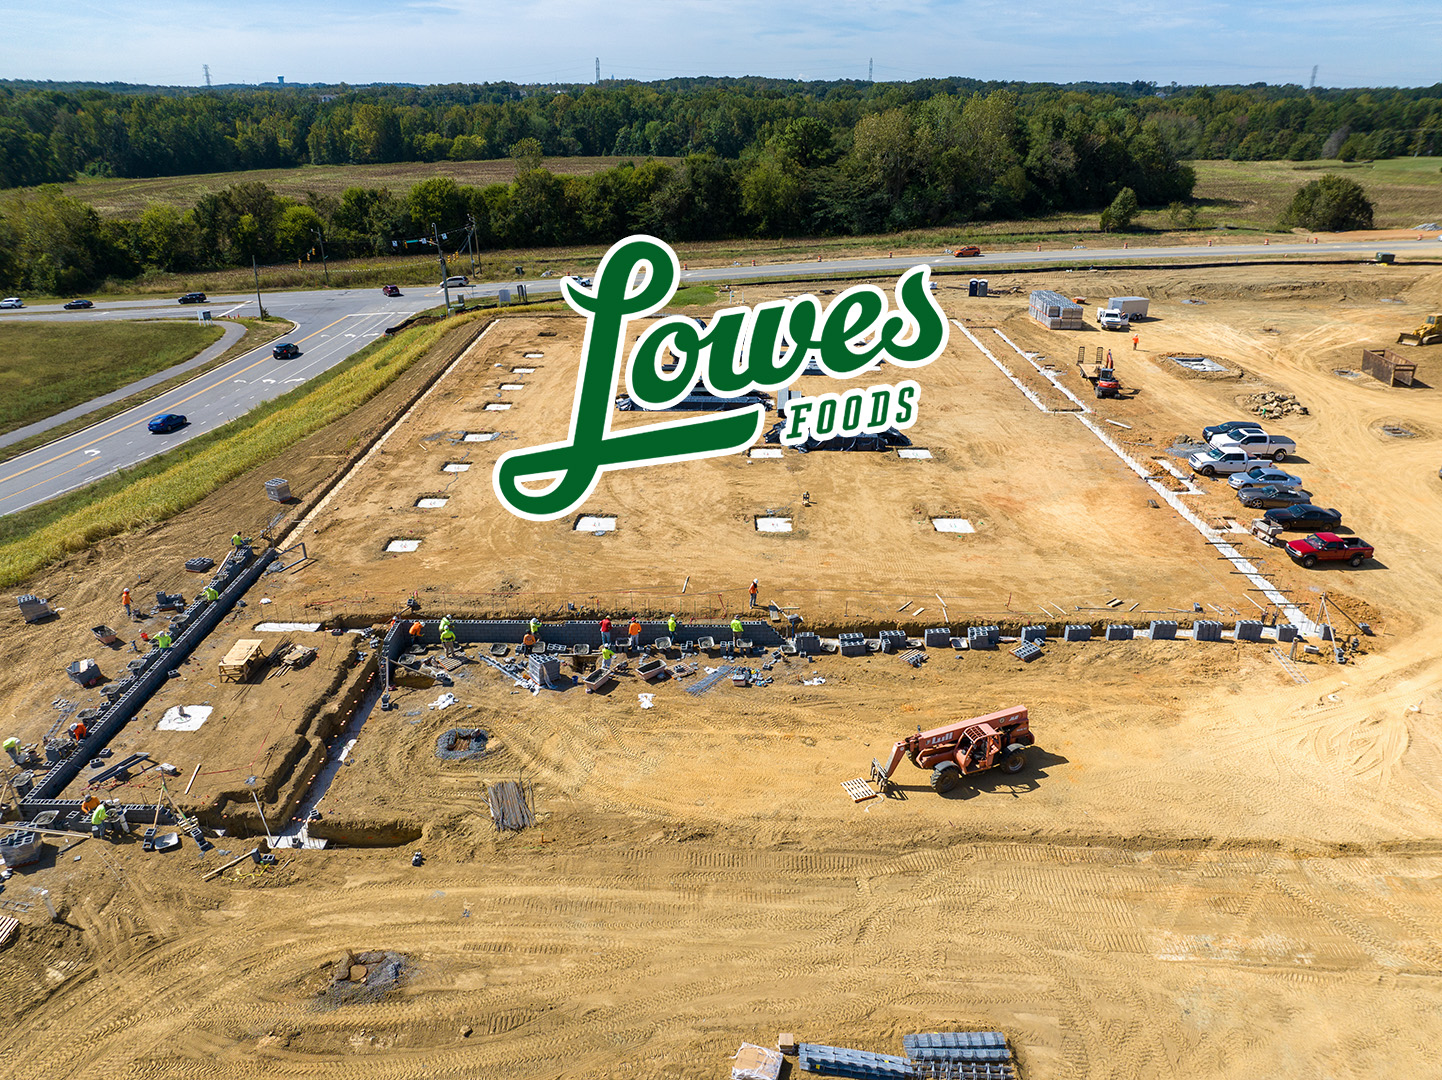 pad site for Lowes Foods with logo superimposed on dirt outlined by building foundation beginnings